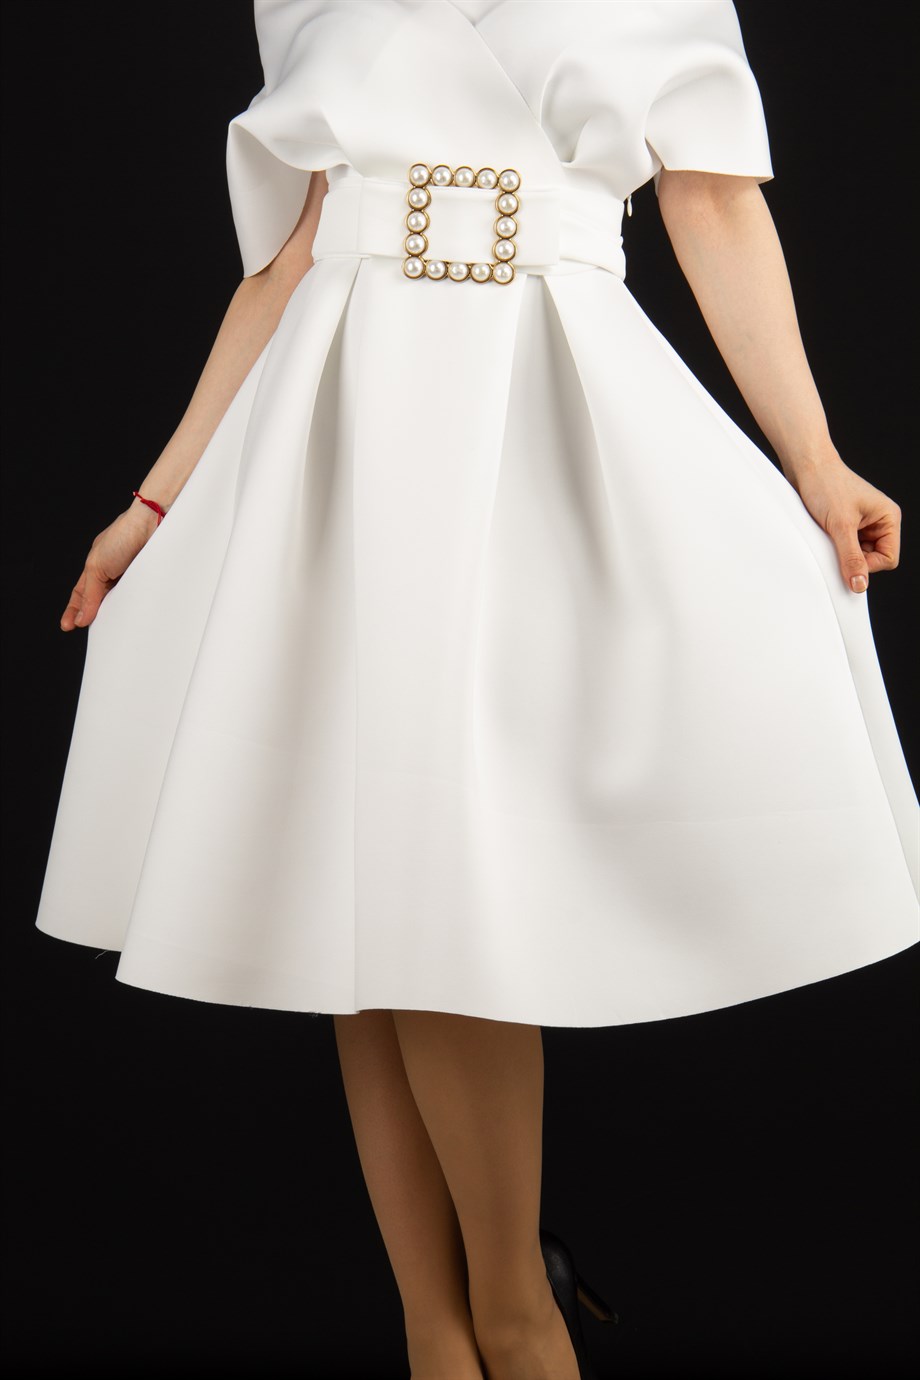 Chic Pearl Shell Chain Belt For Women Elegant Metal Tape Slim Waistband For  Dress, Skirt, And Banquet From Hop888, $11.2 | DHgate.Com